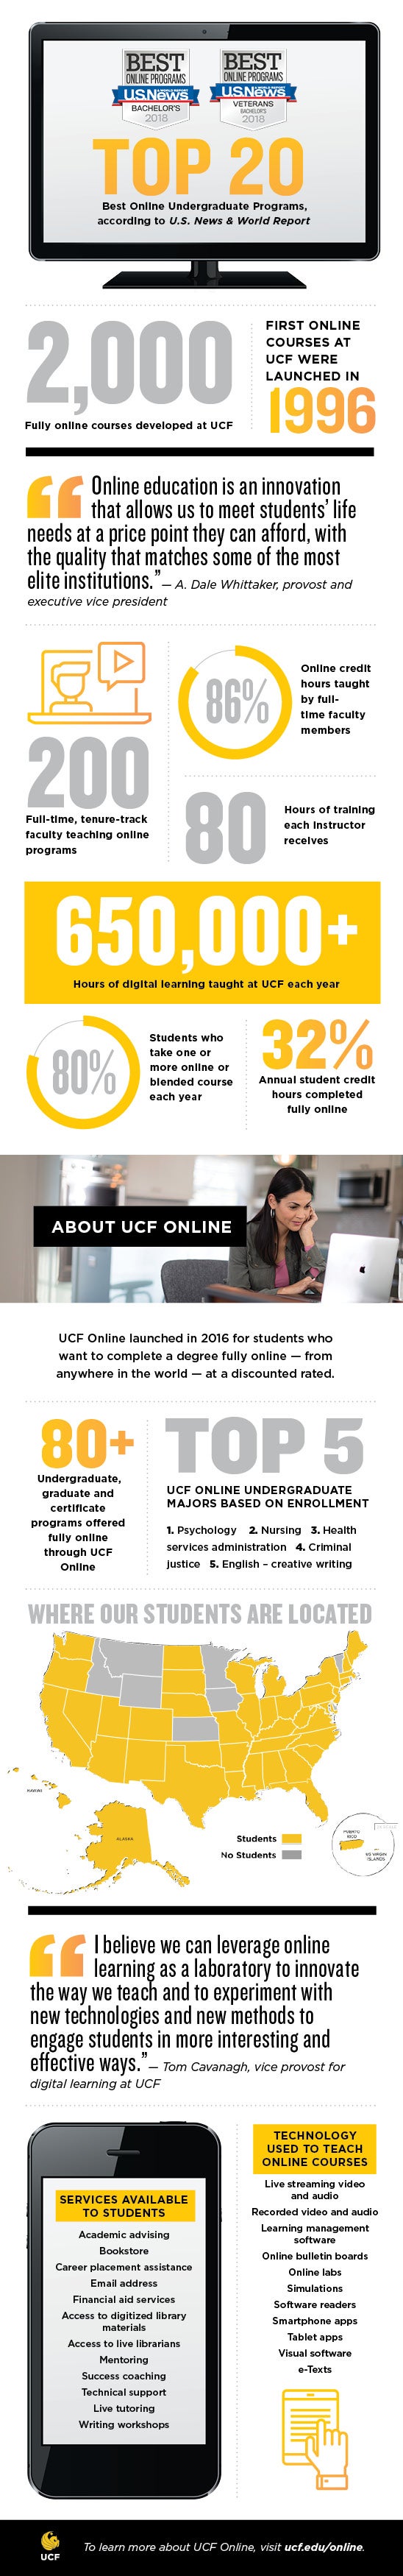 Top 20 Best Online Undergraduate Programs, according to U.S. News & World Report. / 2,000 Fully online courses developed at UCF. / 1996 Year first online courses were launched at UCF. / “Online education is an innovation that allows us to meet students’ life needs at a price point they can afford, with the quality that matches some of the most elite institutions.” — A. Dale Whittaker, provost and executive vice president. / 200 Full-time, tenure-track faculty teaching online programs. 86 percent Online credit hours taught by full-time faculty members. / 80 Hours of training each instructor receives. / 650,000+ Hours of digital learning taught at UCF each year. / 80 percent Students who take one or more online or blended course each year. / About UCF Online: UCF Online launched in 2016 for students who want to take their programs fully online, from anywhere in the world, at a discounted rated. / 80 + Undergraduate, graduate and certificate programs offered fully through UCF Online. / Top 5 UCF Online undergraduate majors based on enrollment: 1. Psychology 2. Nursing 3. Health services administration 4. Criminal justice 5. English – creative writing. / UCF Online students are located in every state except Idaho, Montana, Wyoming, Minnesota, Iowa, Kansas and Vermont. / "I believe we can leverage online learning as a laboratory to innovate the way we teach and to experiment with new technologies and new methods to engage students in more interesting and effective ways.” — Tom Cavanagh, vice provost for digital learning at UCF. / Services available to students: Academic advising, bookstore, career placement assistance, email address, financial aid services, access to digitized library materials, access to live librarians, mentoring, success coaching, technical support, live tutoring, and writing workshops. / Technology used to teach online courses: Live streaming video and audio, recorded video and audio, learning management software, online bulletin boards, online labs, simulations, software readers, smartphone apps, tablet apps, visual software, and e-texts. / To learn more about UCF Online, visit ucf.edu/online.